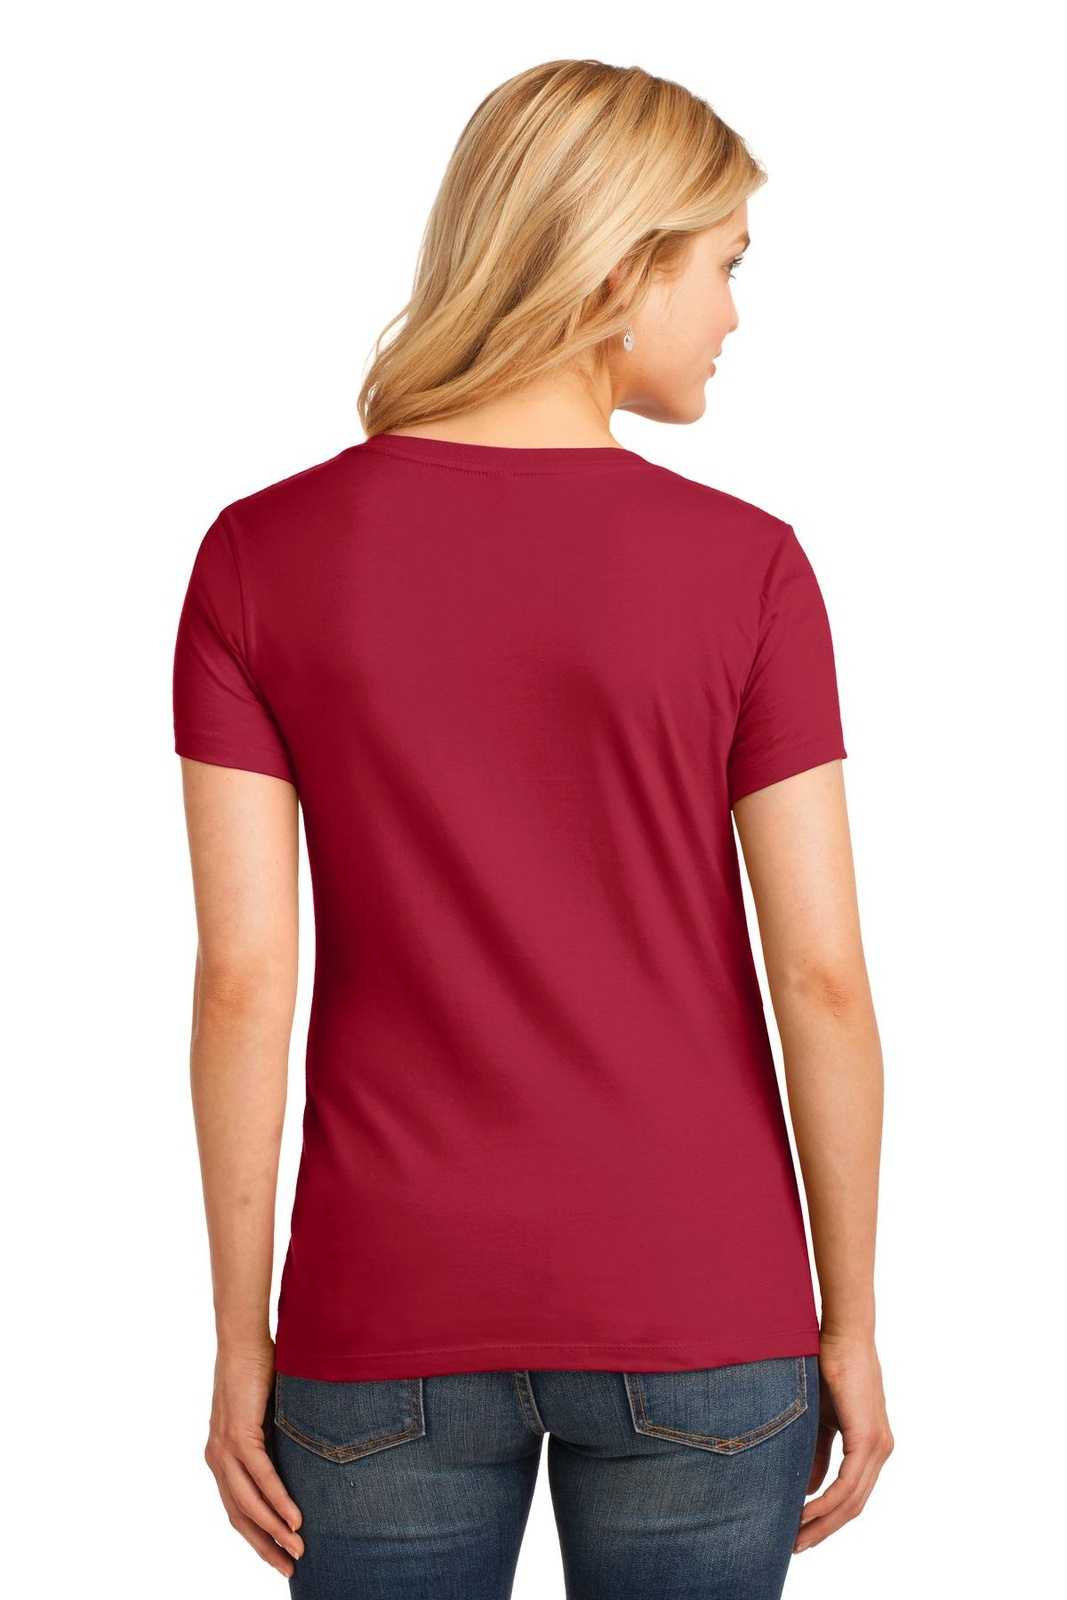 Port & Company LPC54V Ladies Core Cotton V-Neck Tee - Red - HIT a Double - 1